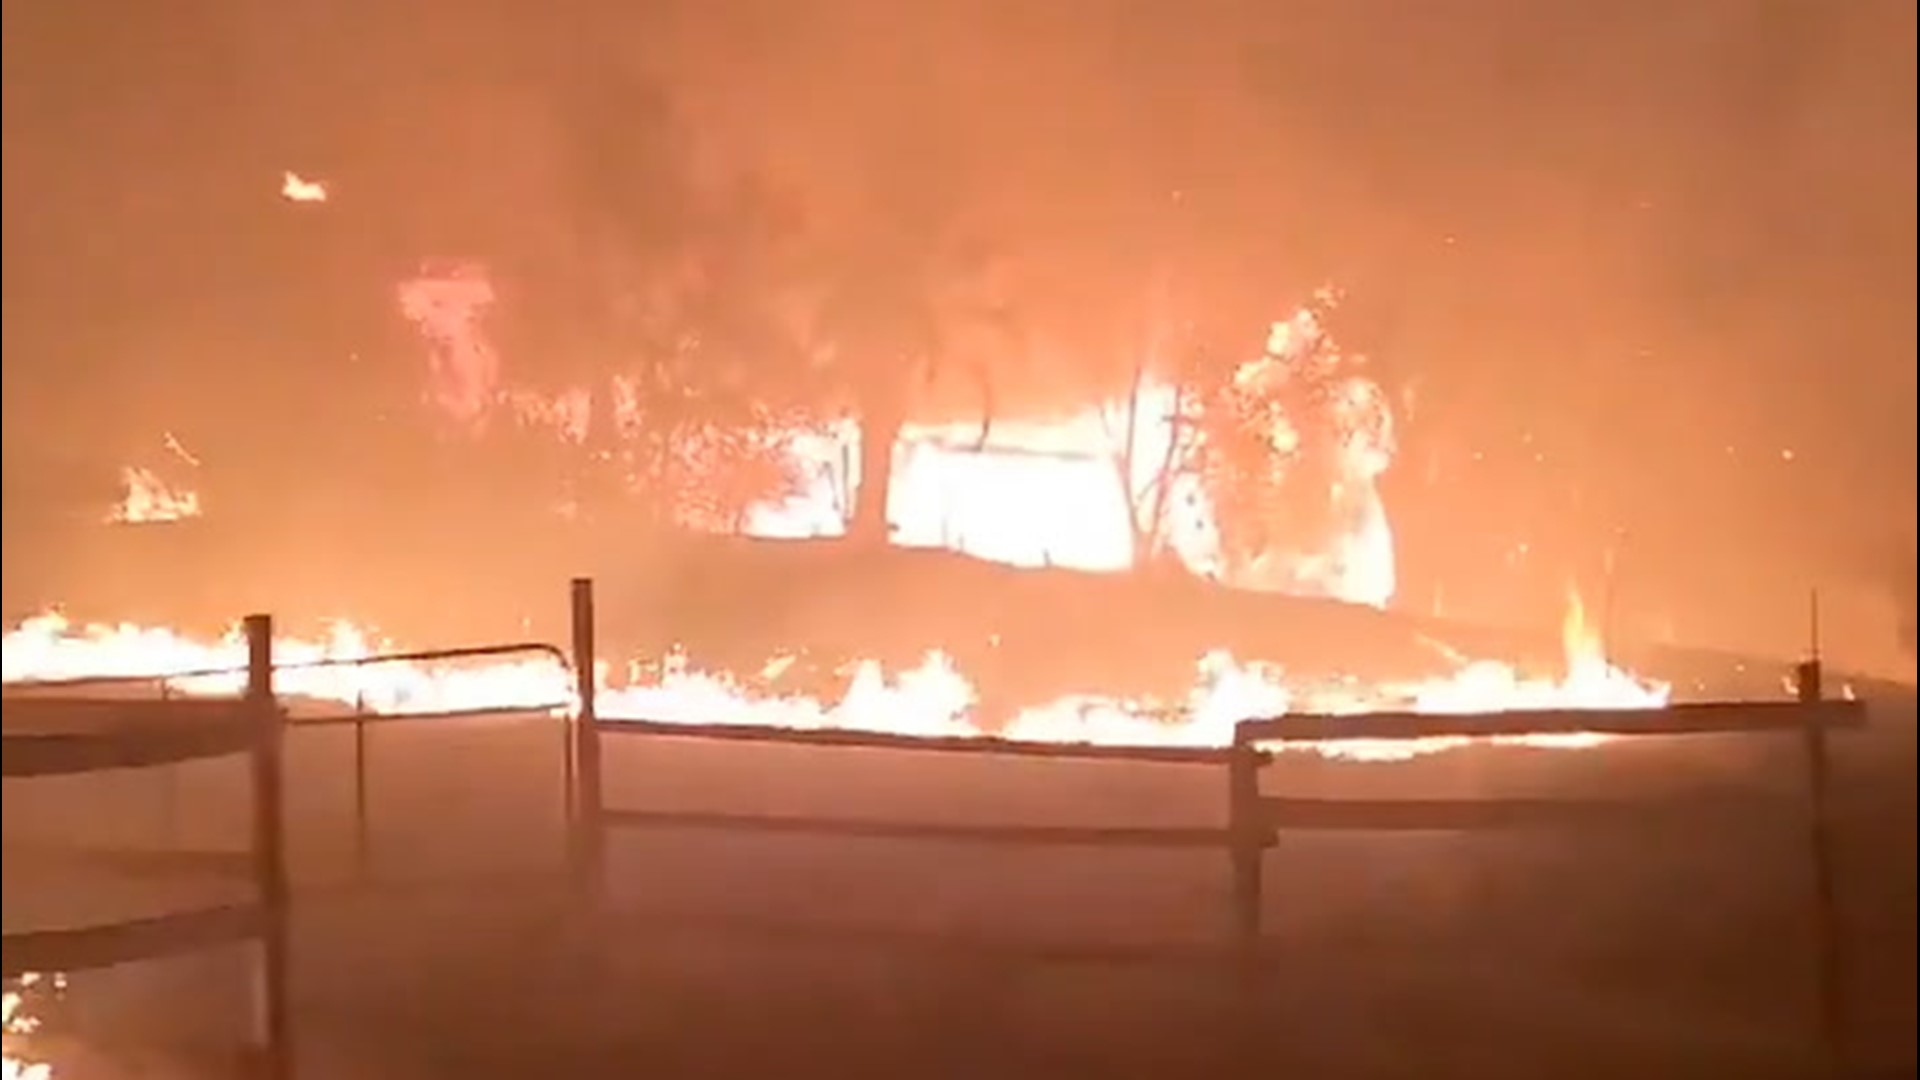 This scary video shows the Glass Fire dangerously close to this road in Santa Rosa, California, in the early morning of Sept. 28.